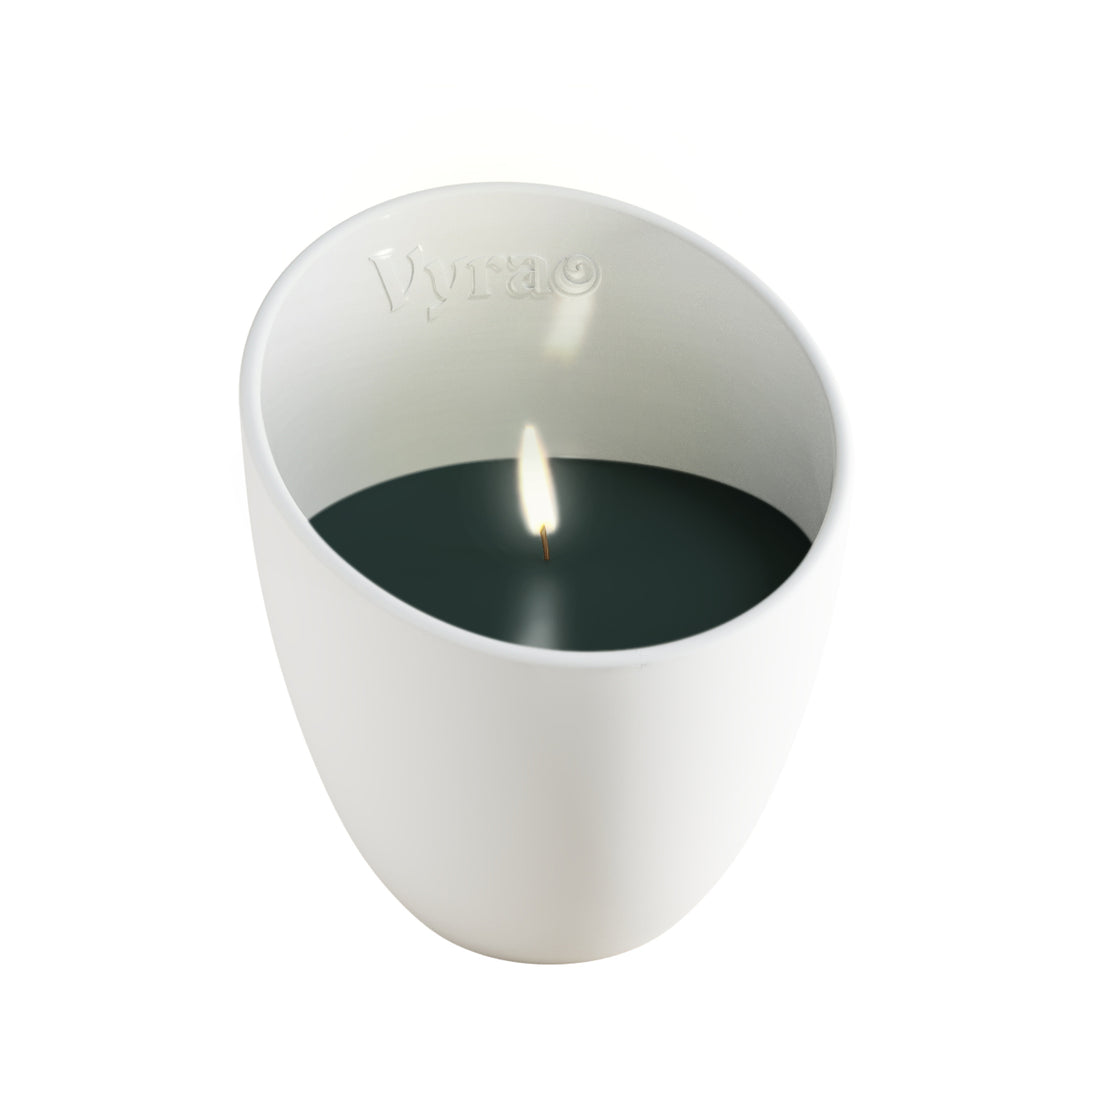 Vyrao Ember Candle 170 g